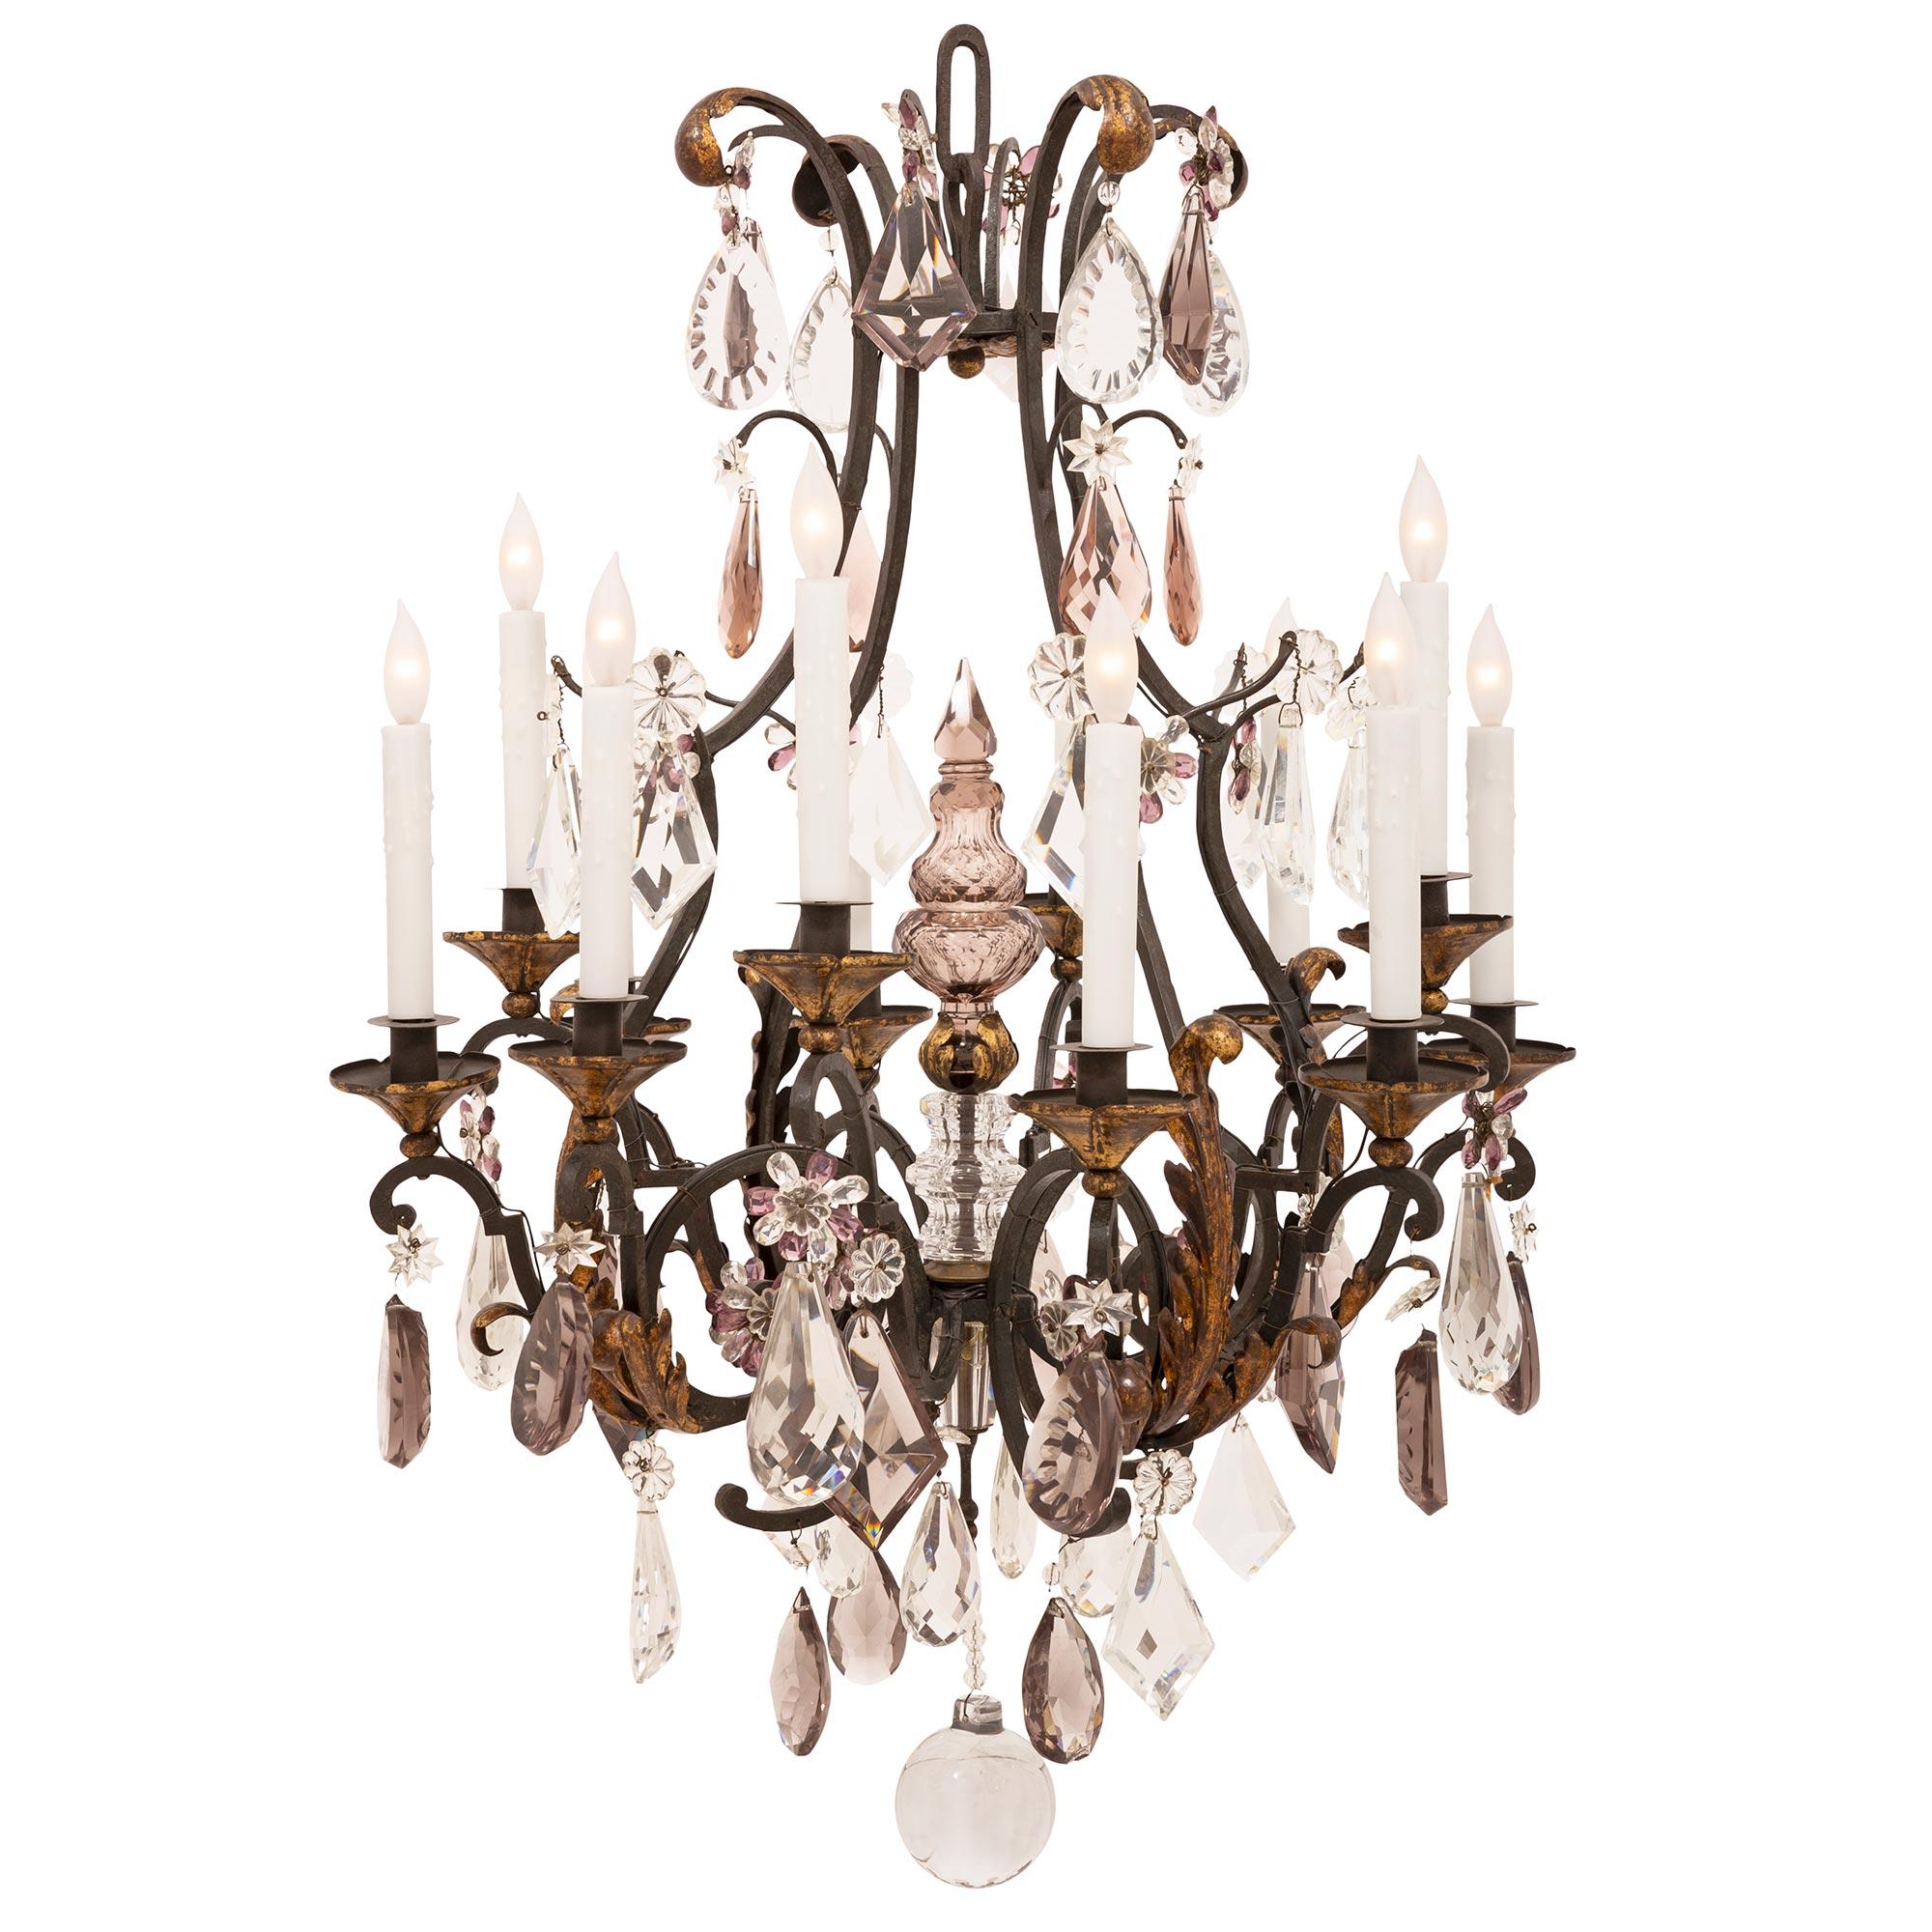 An elegant and most charming French 19th century Louis XV st. Baccarat crystal, patinated and gilt iron chandelier. The twelve arm chandelier is centered by an impressive solid smooth crystal ball amidst an array of exquisite clear and amethyst